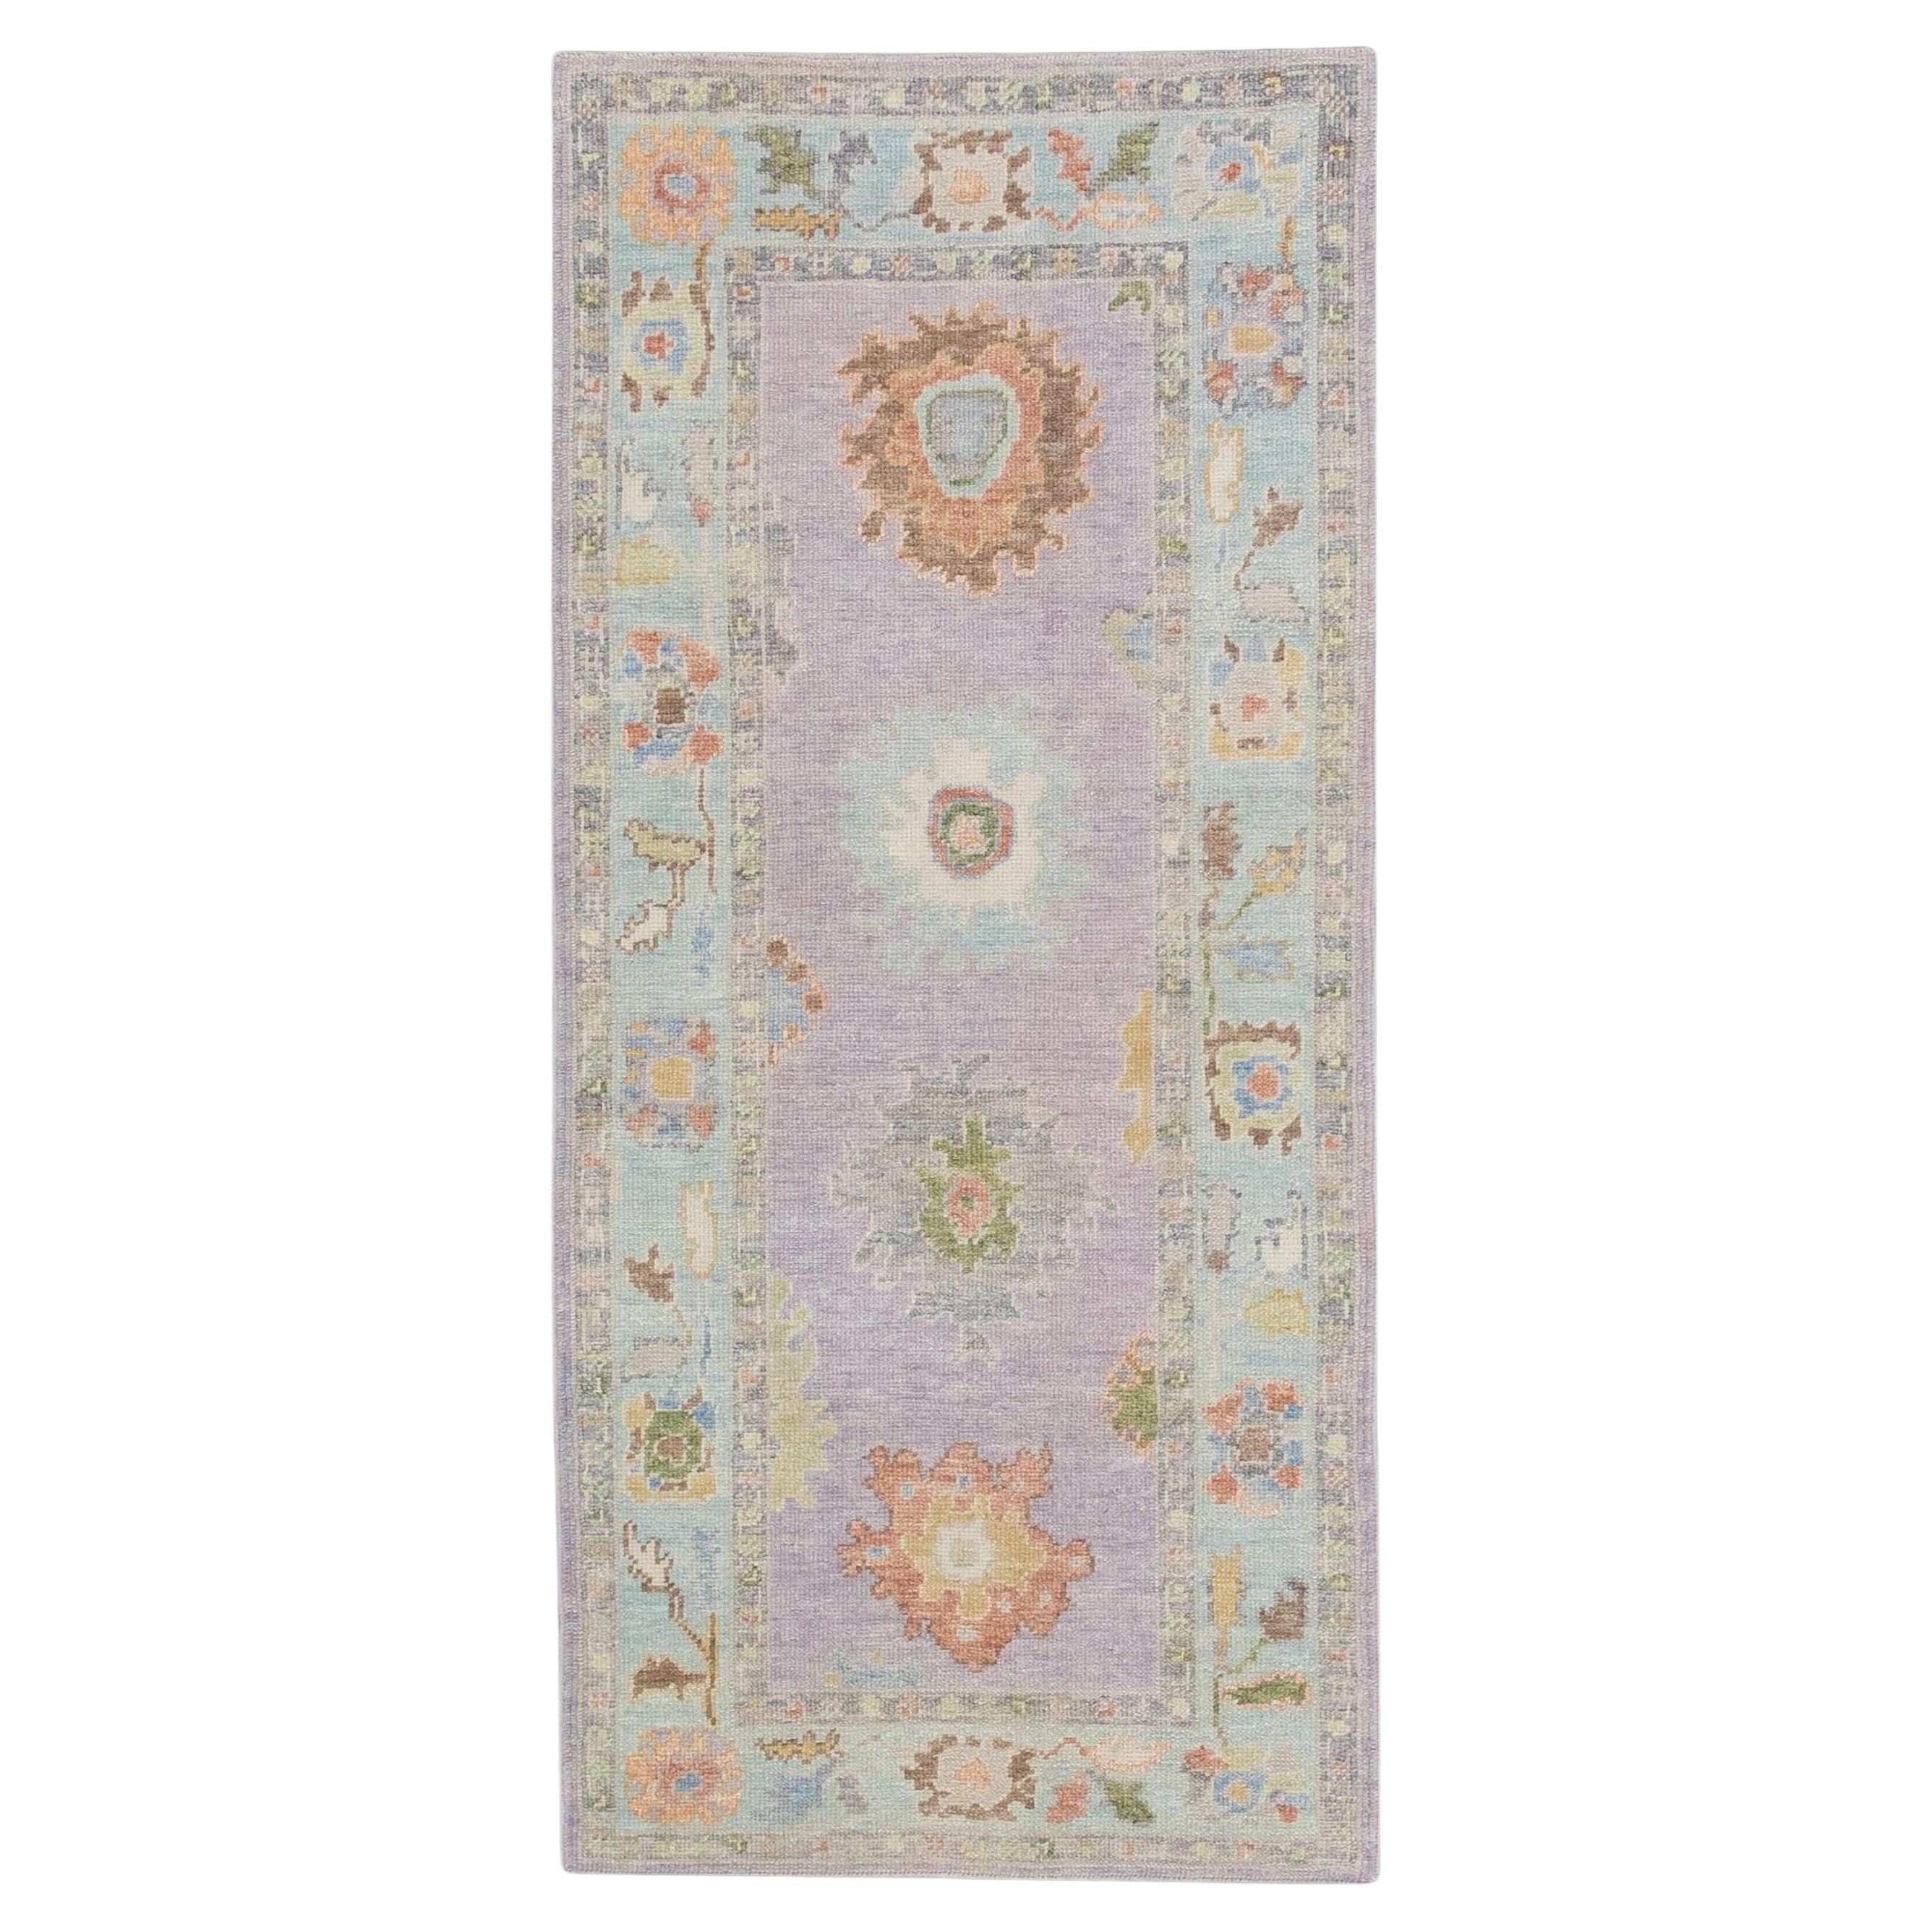 Handwoven Wool Turkish Oushak Rug with Lilac Floral Design 3'1" x 6'6" For Sale